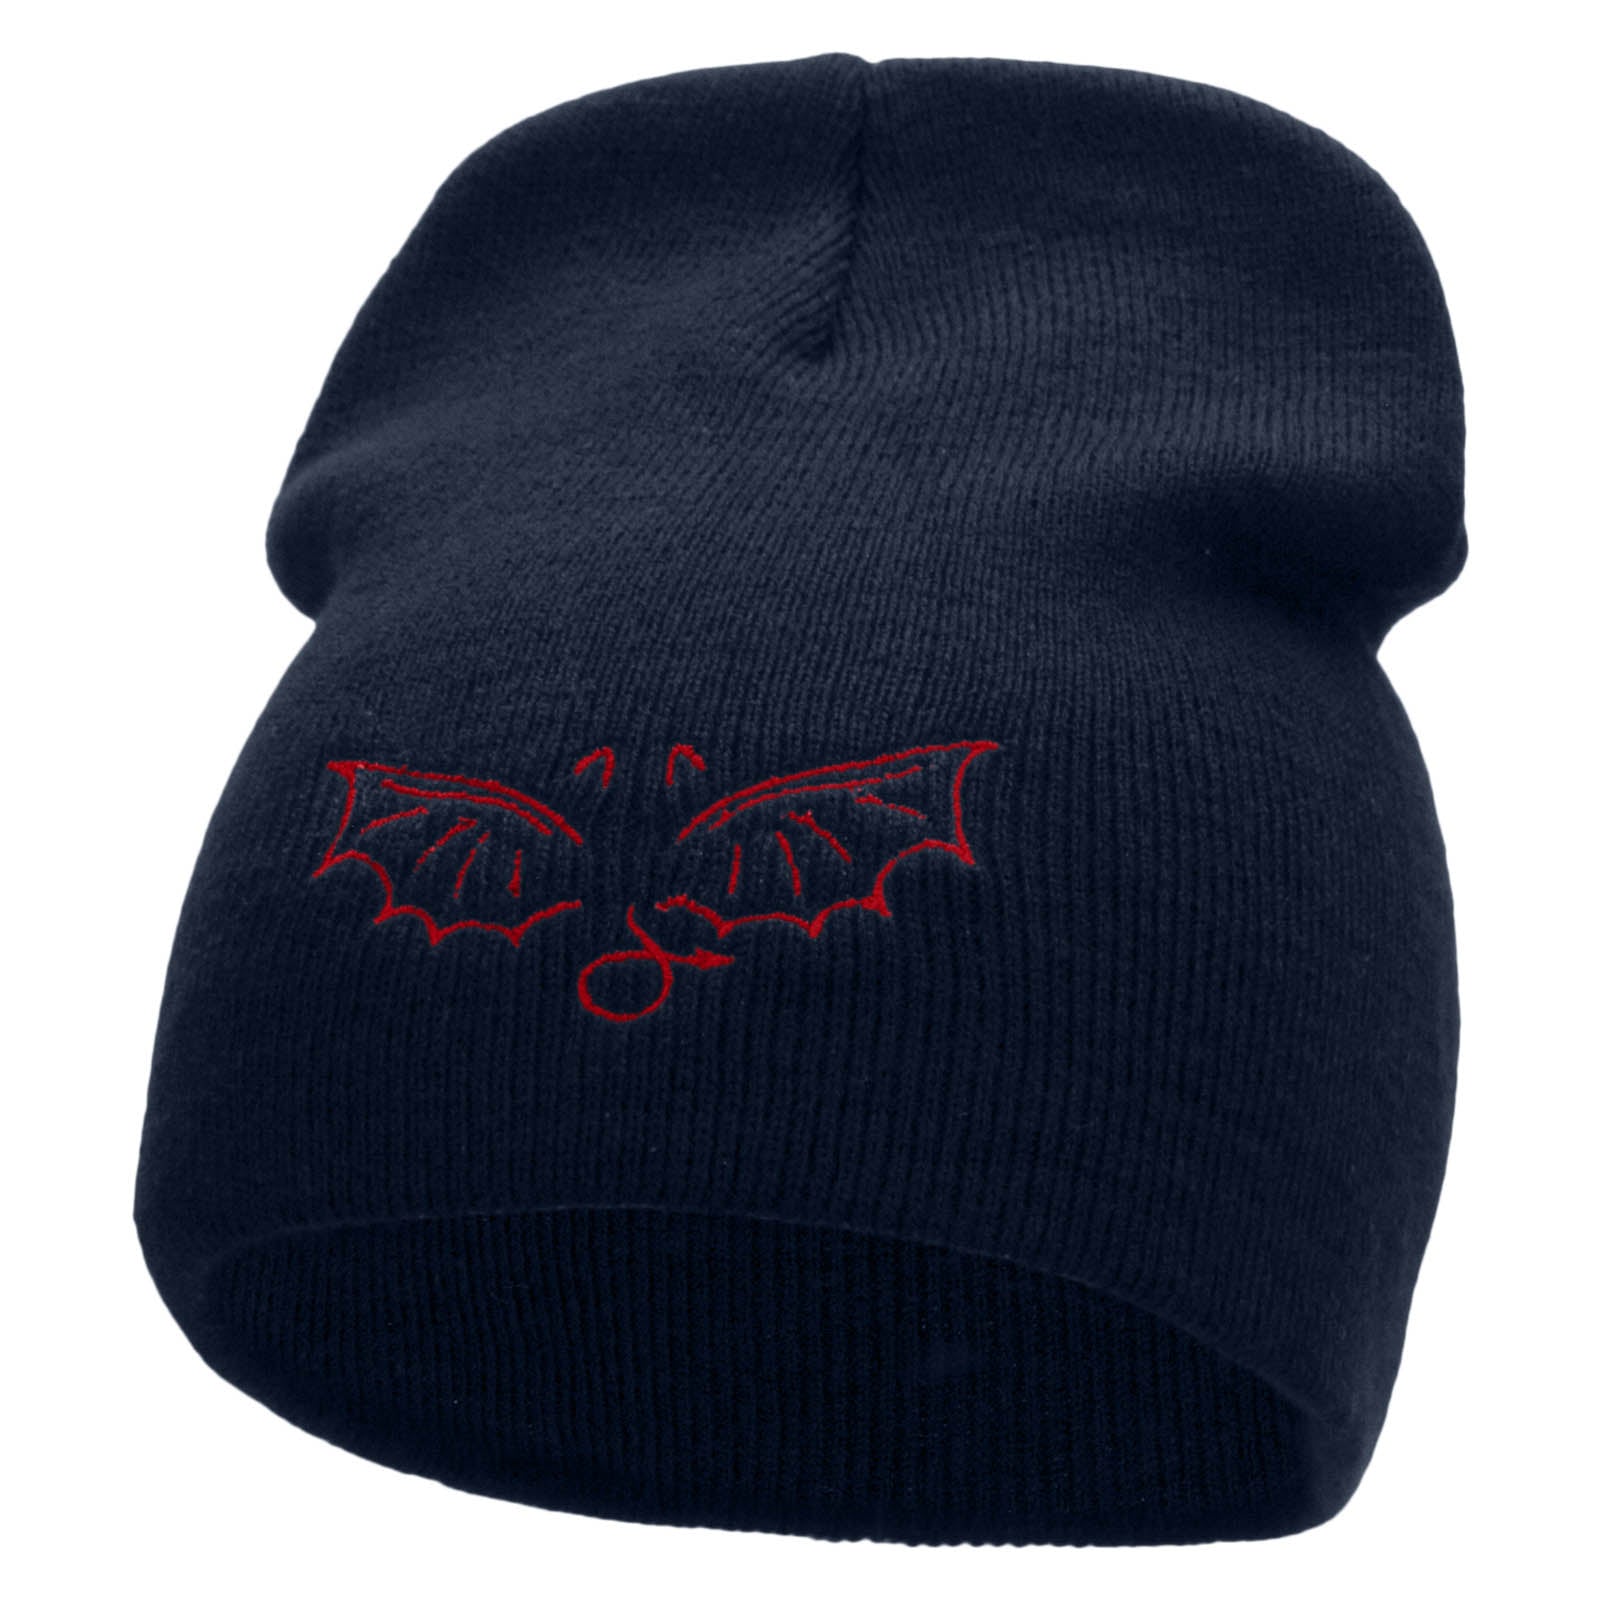 Devil Wings Embroidered 8 inch Acrylic Short Blank Beanie - Navy OSFM